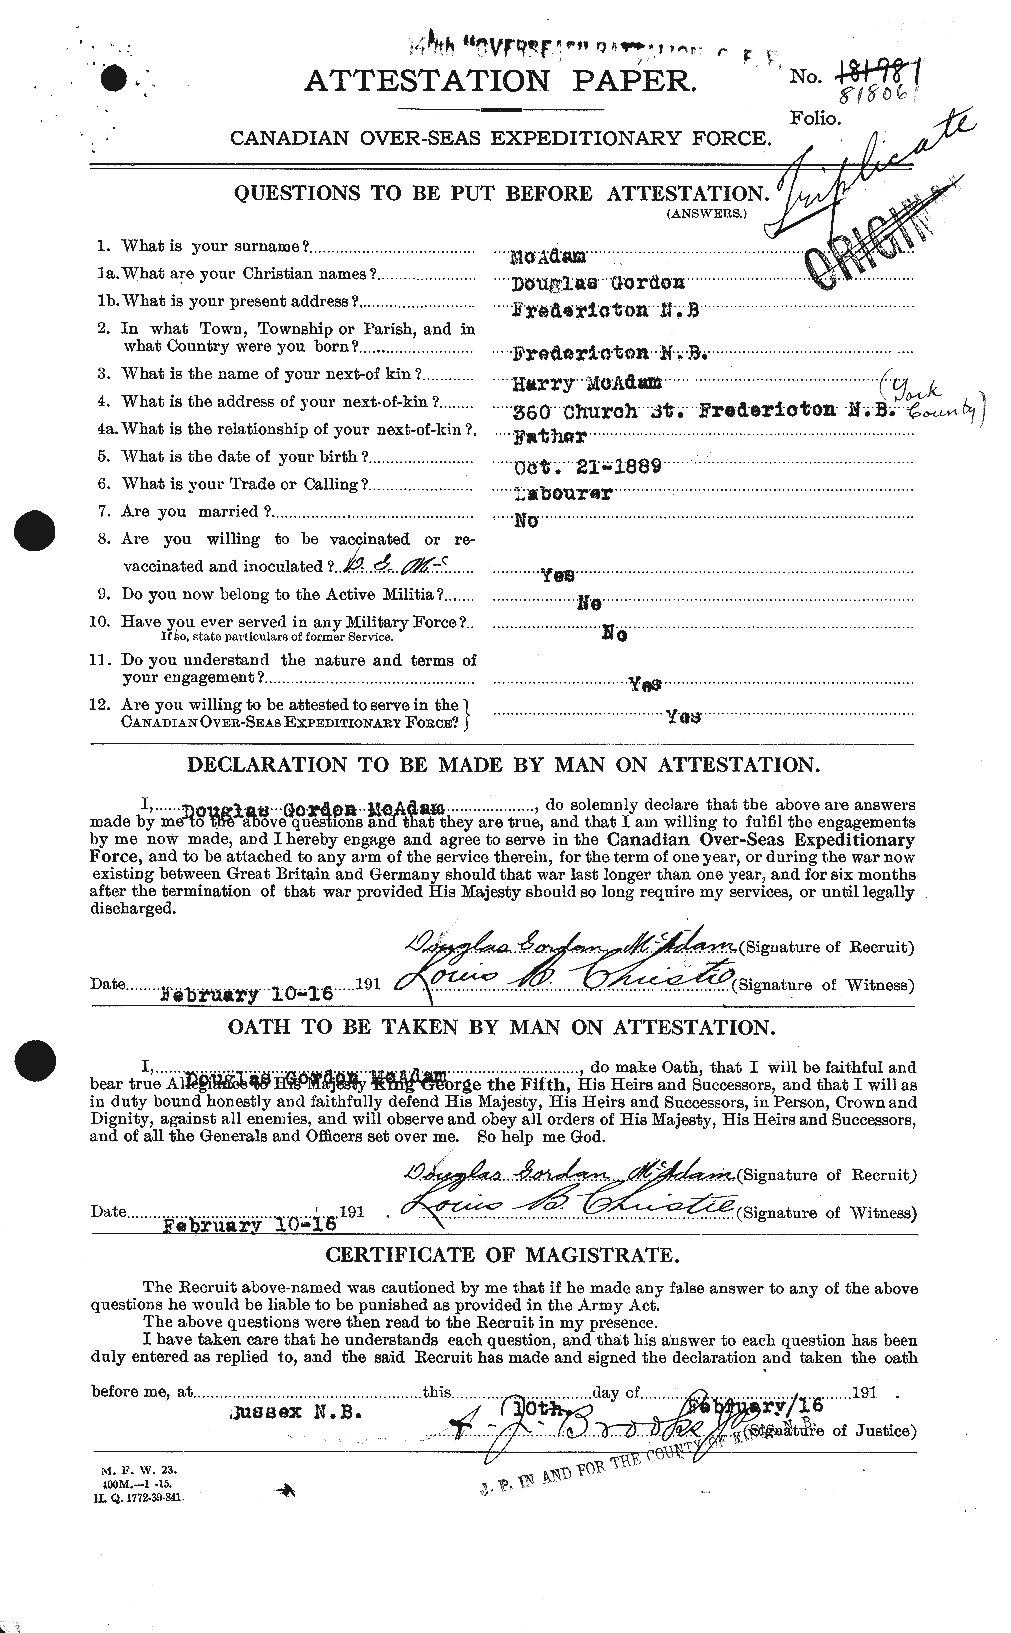 Personnel Records of the First World War - CEF 130460a